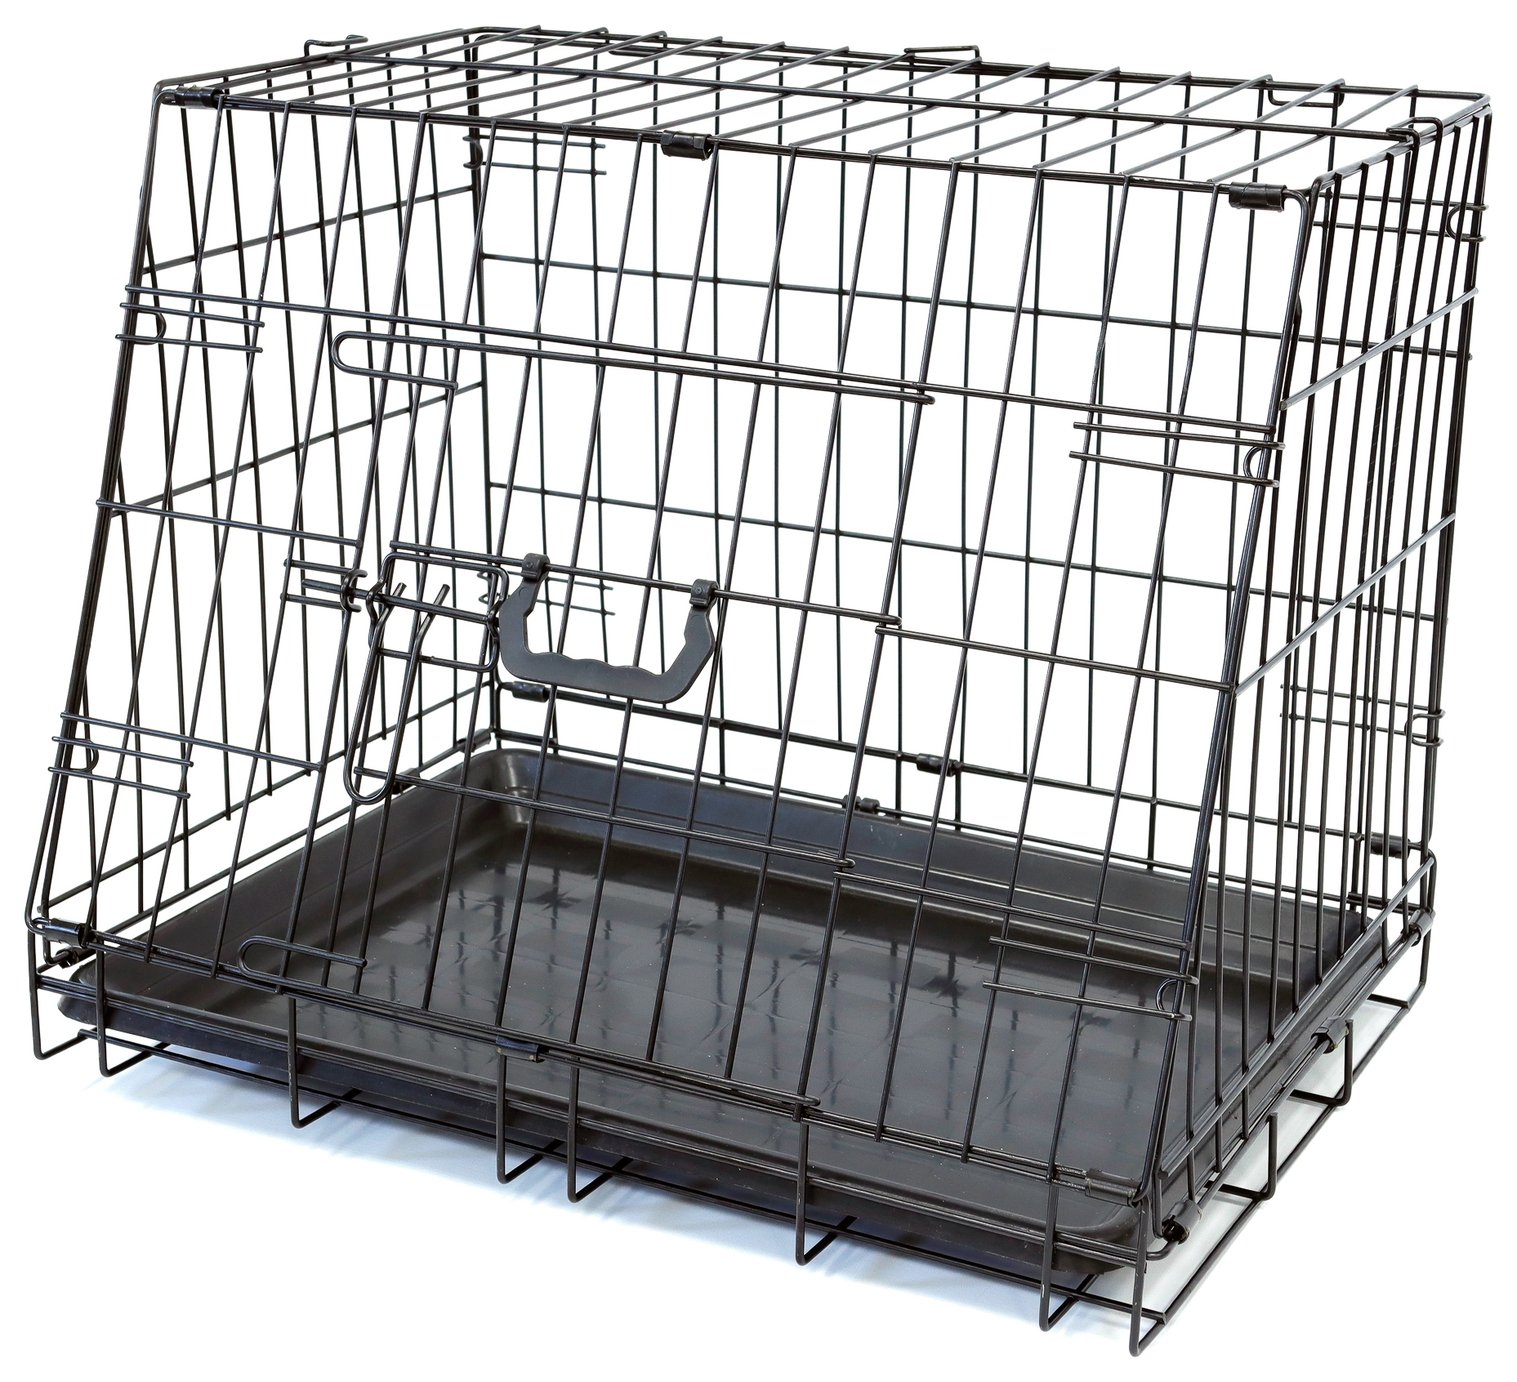 Streetwize Dog Crate For Car Boot - Small